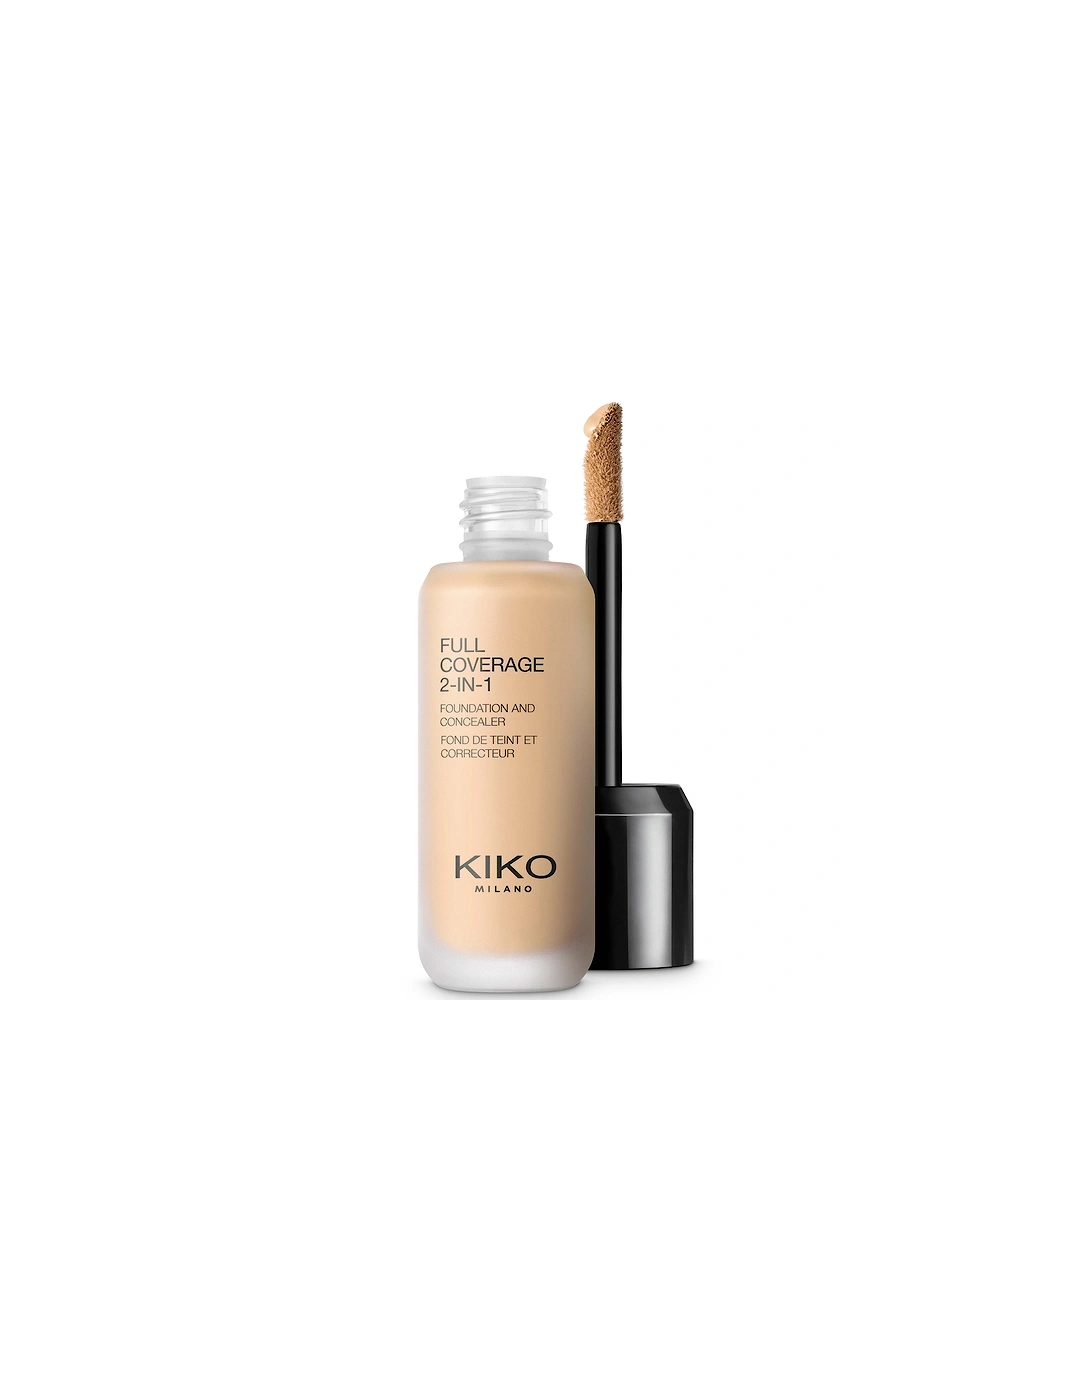 Full Coverage 2-in-1 Foundation and Concealer 25ml - 15 Warm Beige, 2 of 1